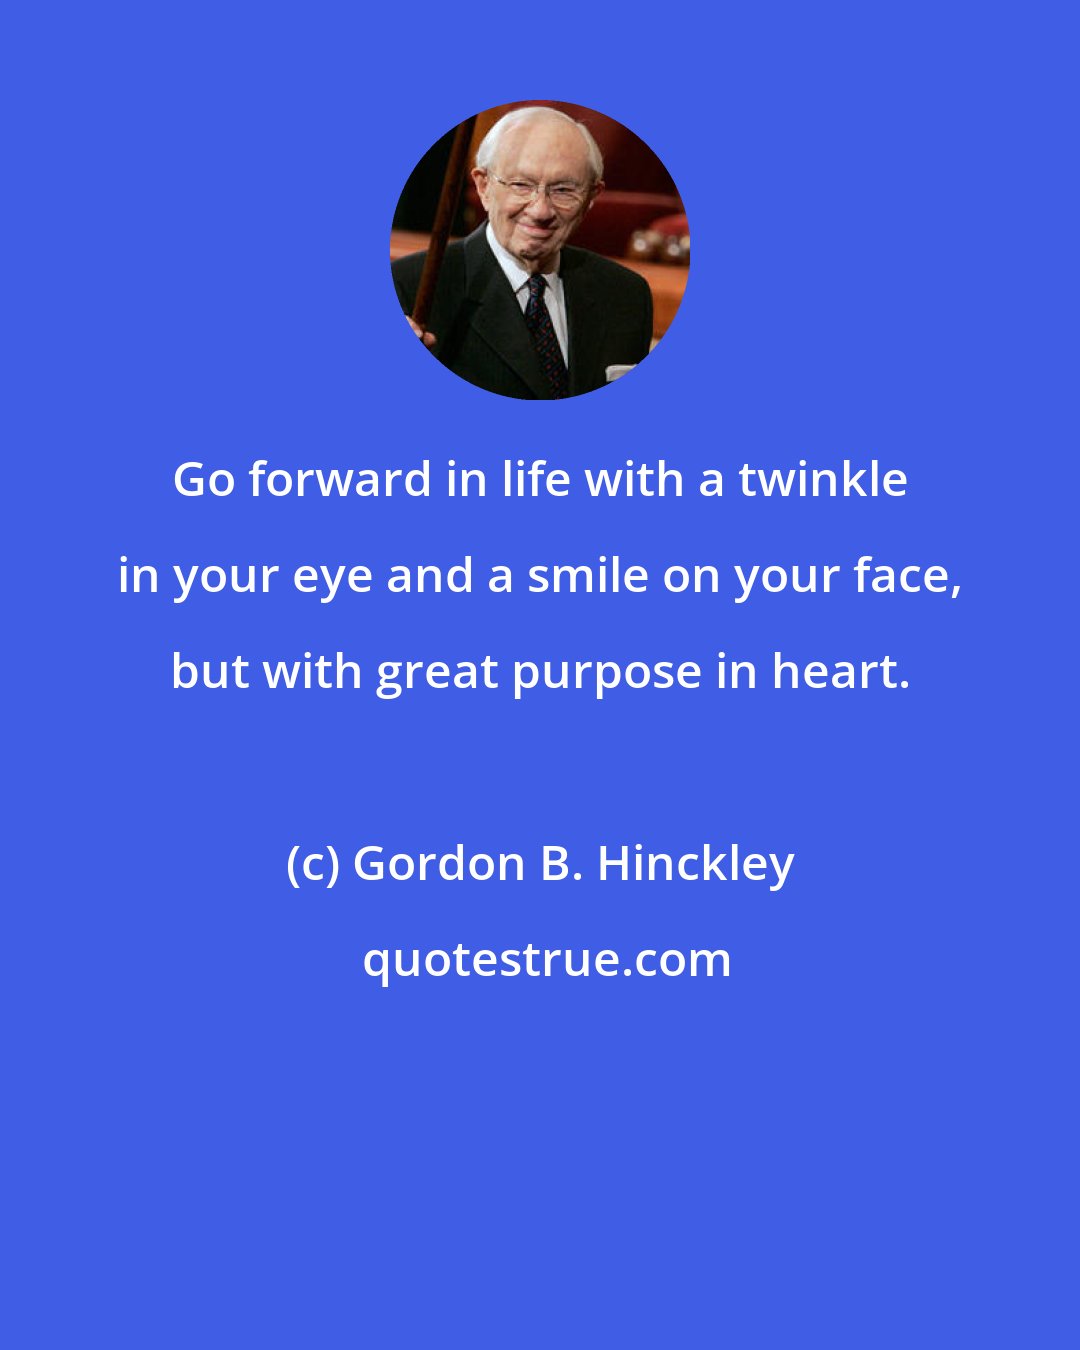 Gordon B. Hinckley: Go forward in life with a twinkle in your eye and a smile on your face, but with great purpose in heart.